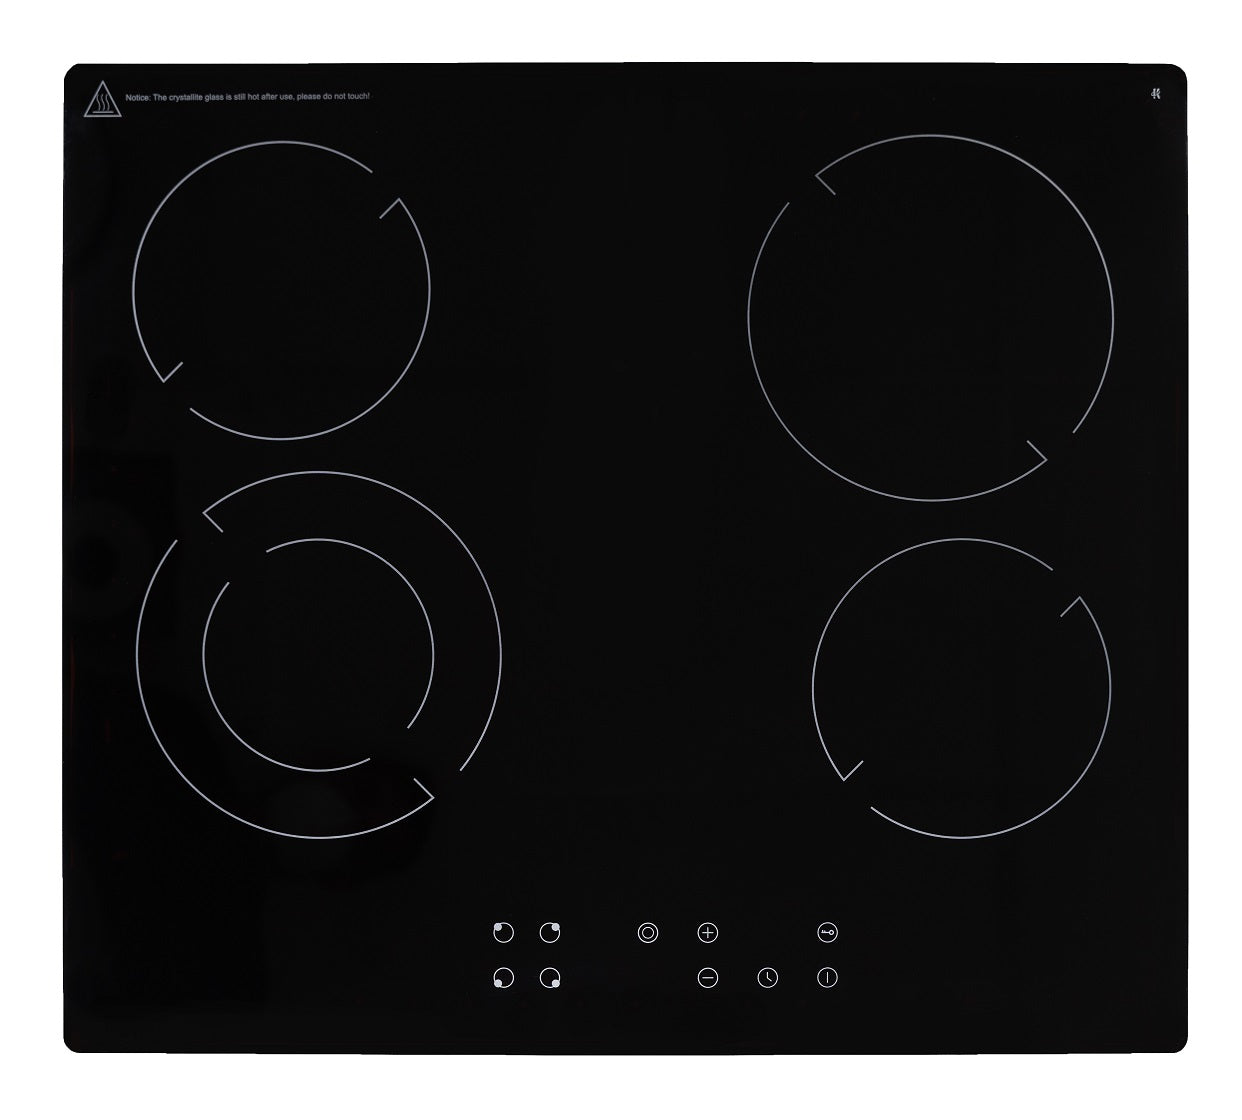 FALCO 60CM Stainless Steel Ceramic Gas Hob - FAL-SSCH-60